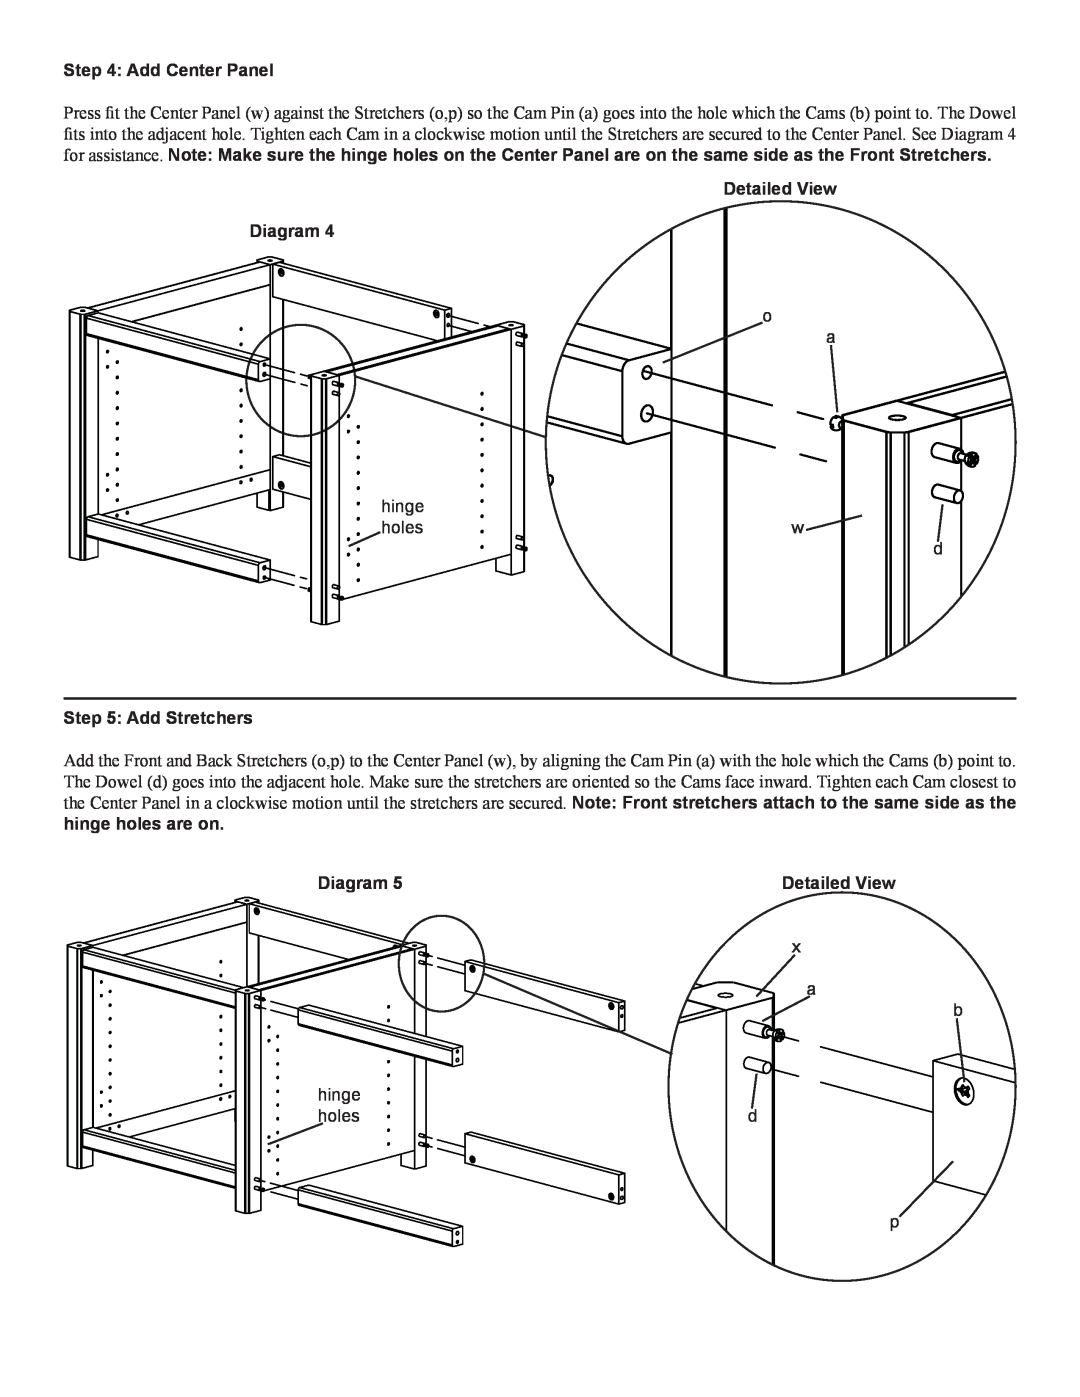 Sanus Systems WFV44 manual Add Center Panel, Add Stretchers, Detailed View Diagram 